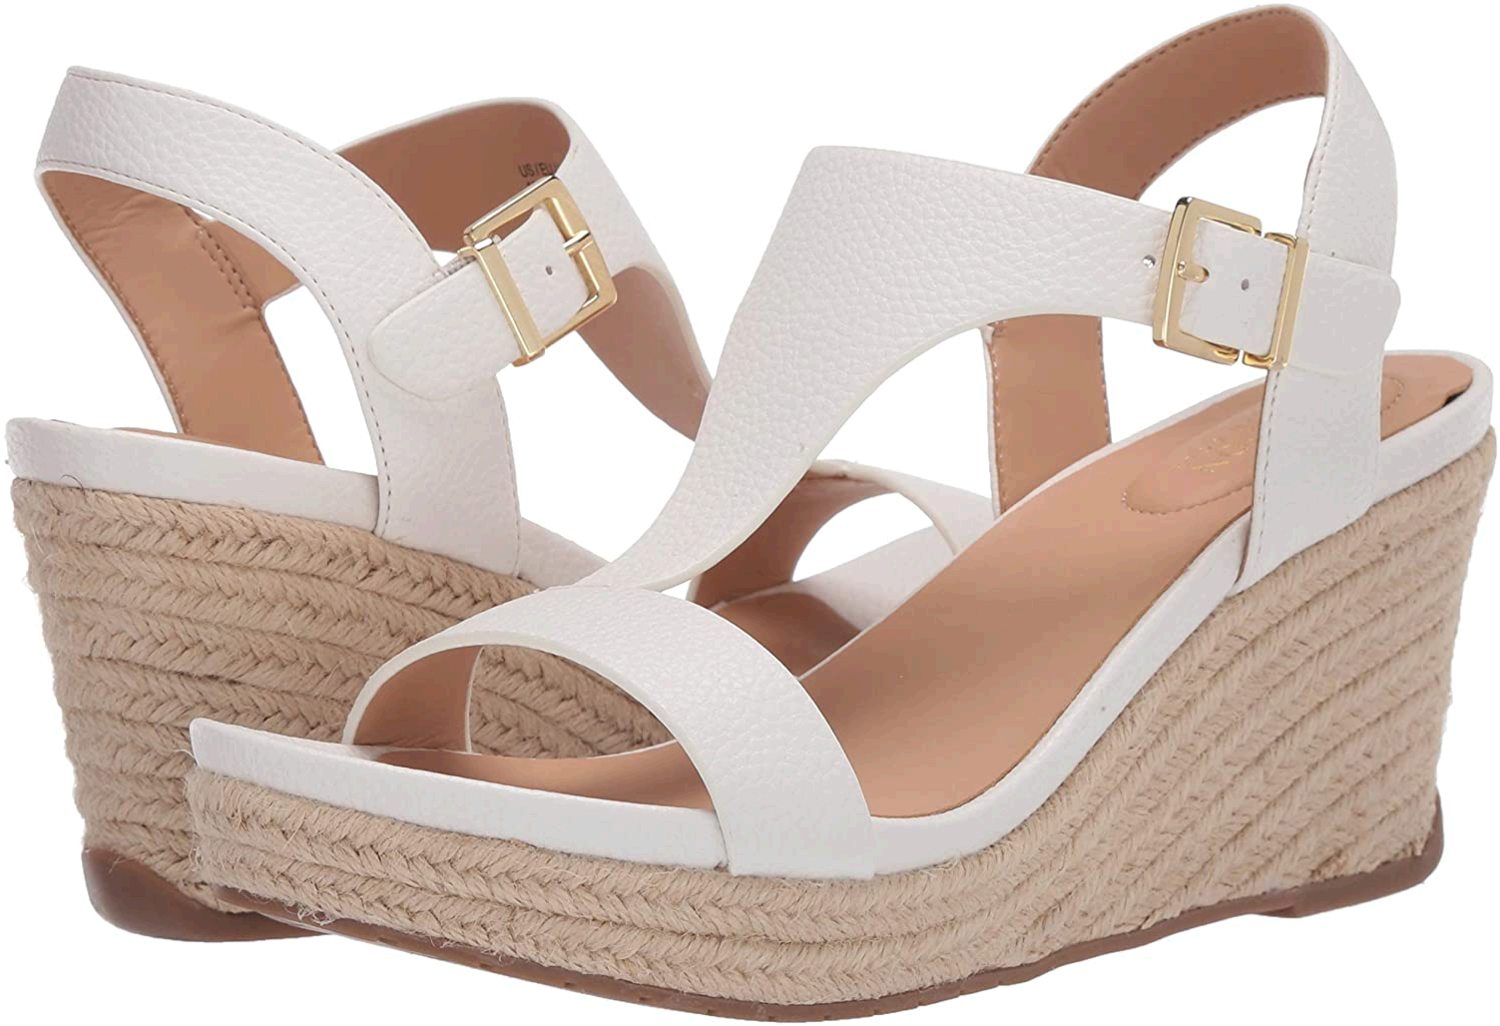 Kenneth Cole REACTION Women's T-Strap Wedge Sandal, White, Size 7.5 ...